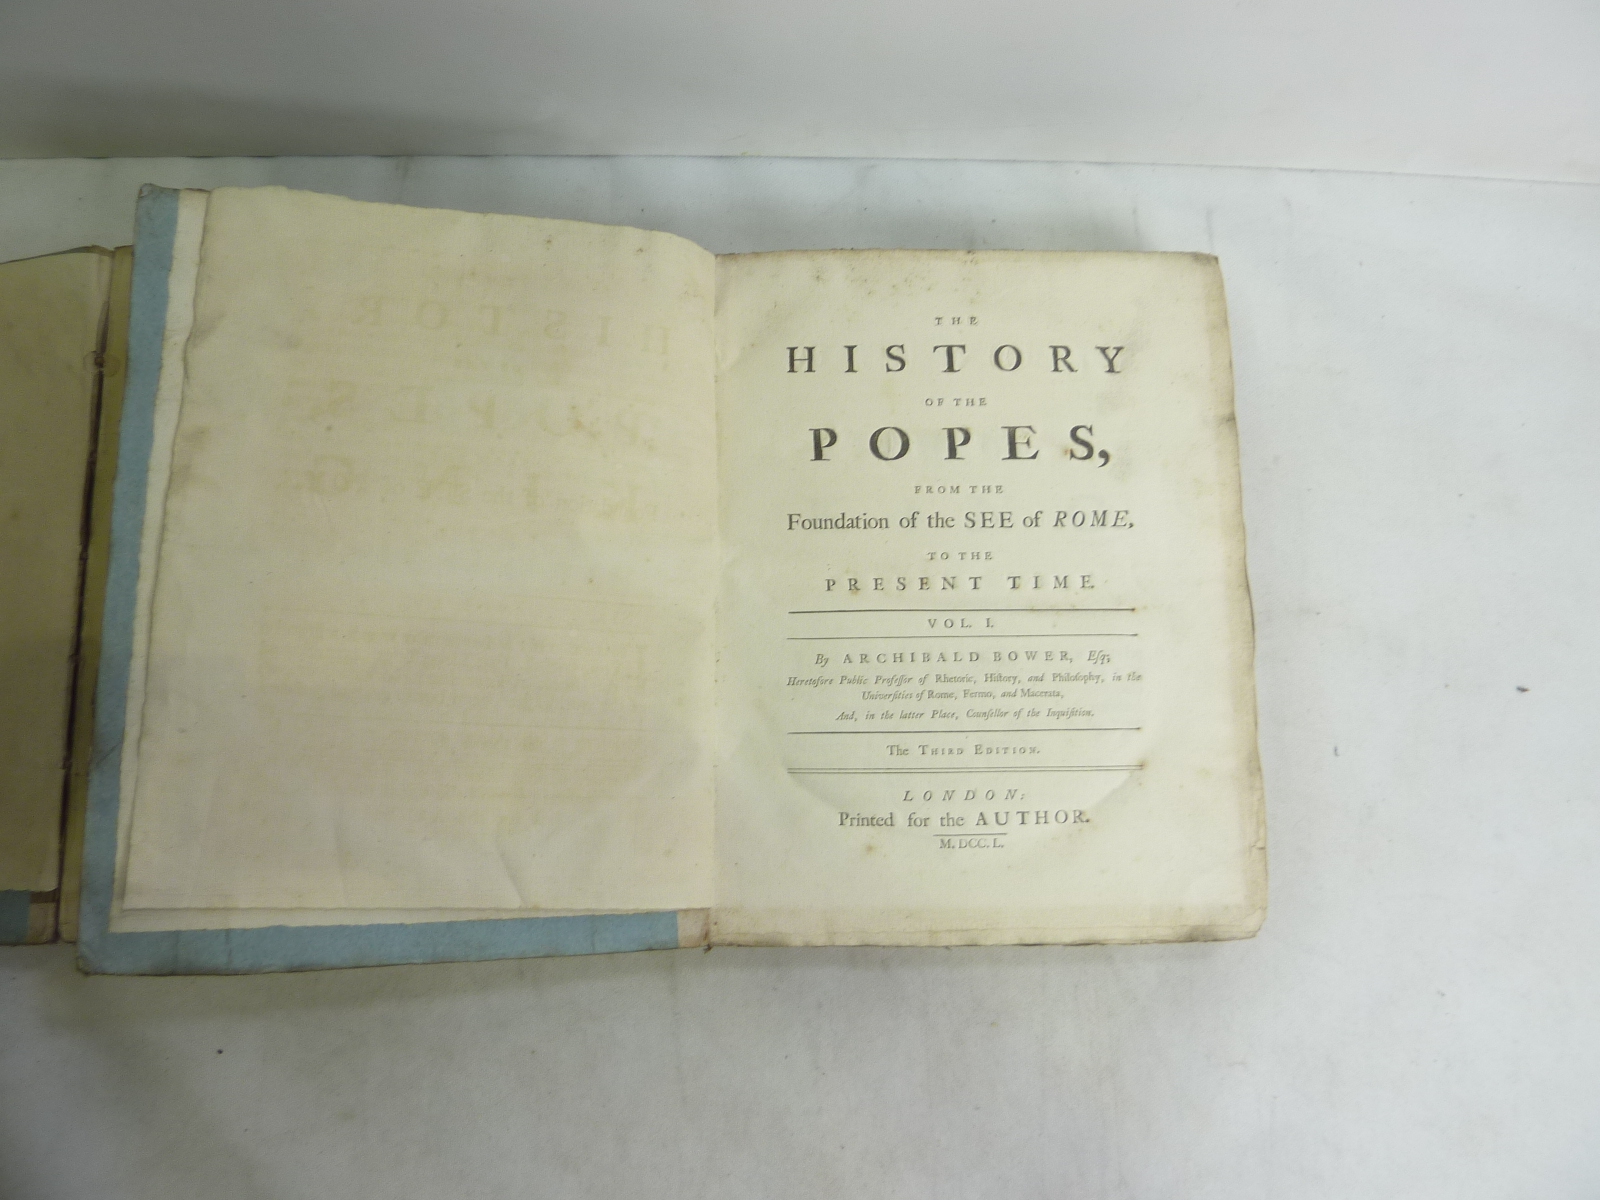 BOWER ARCHIBALD. The History of the Popes. Vols. 1 & 2. Orig. brds. 1750. - Image 2 of 4